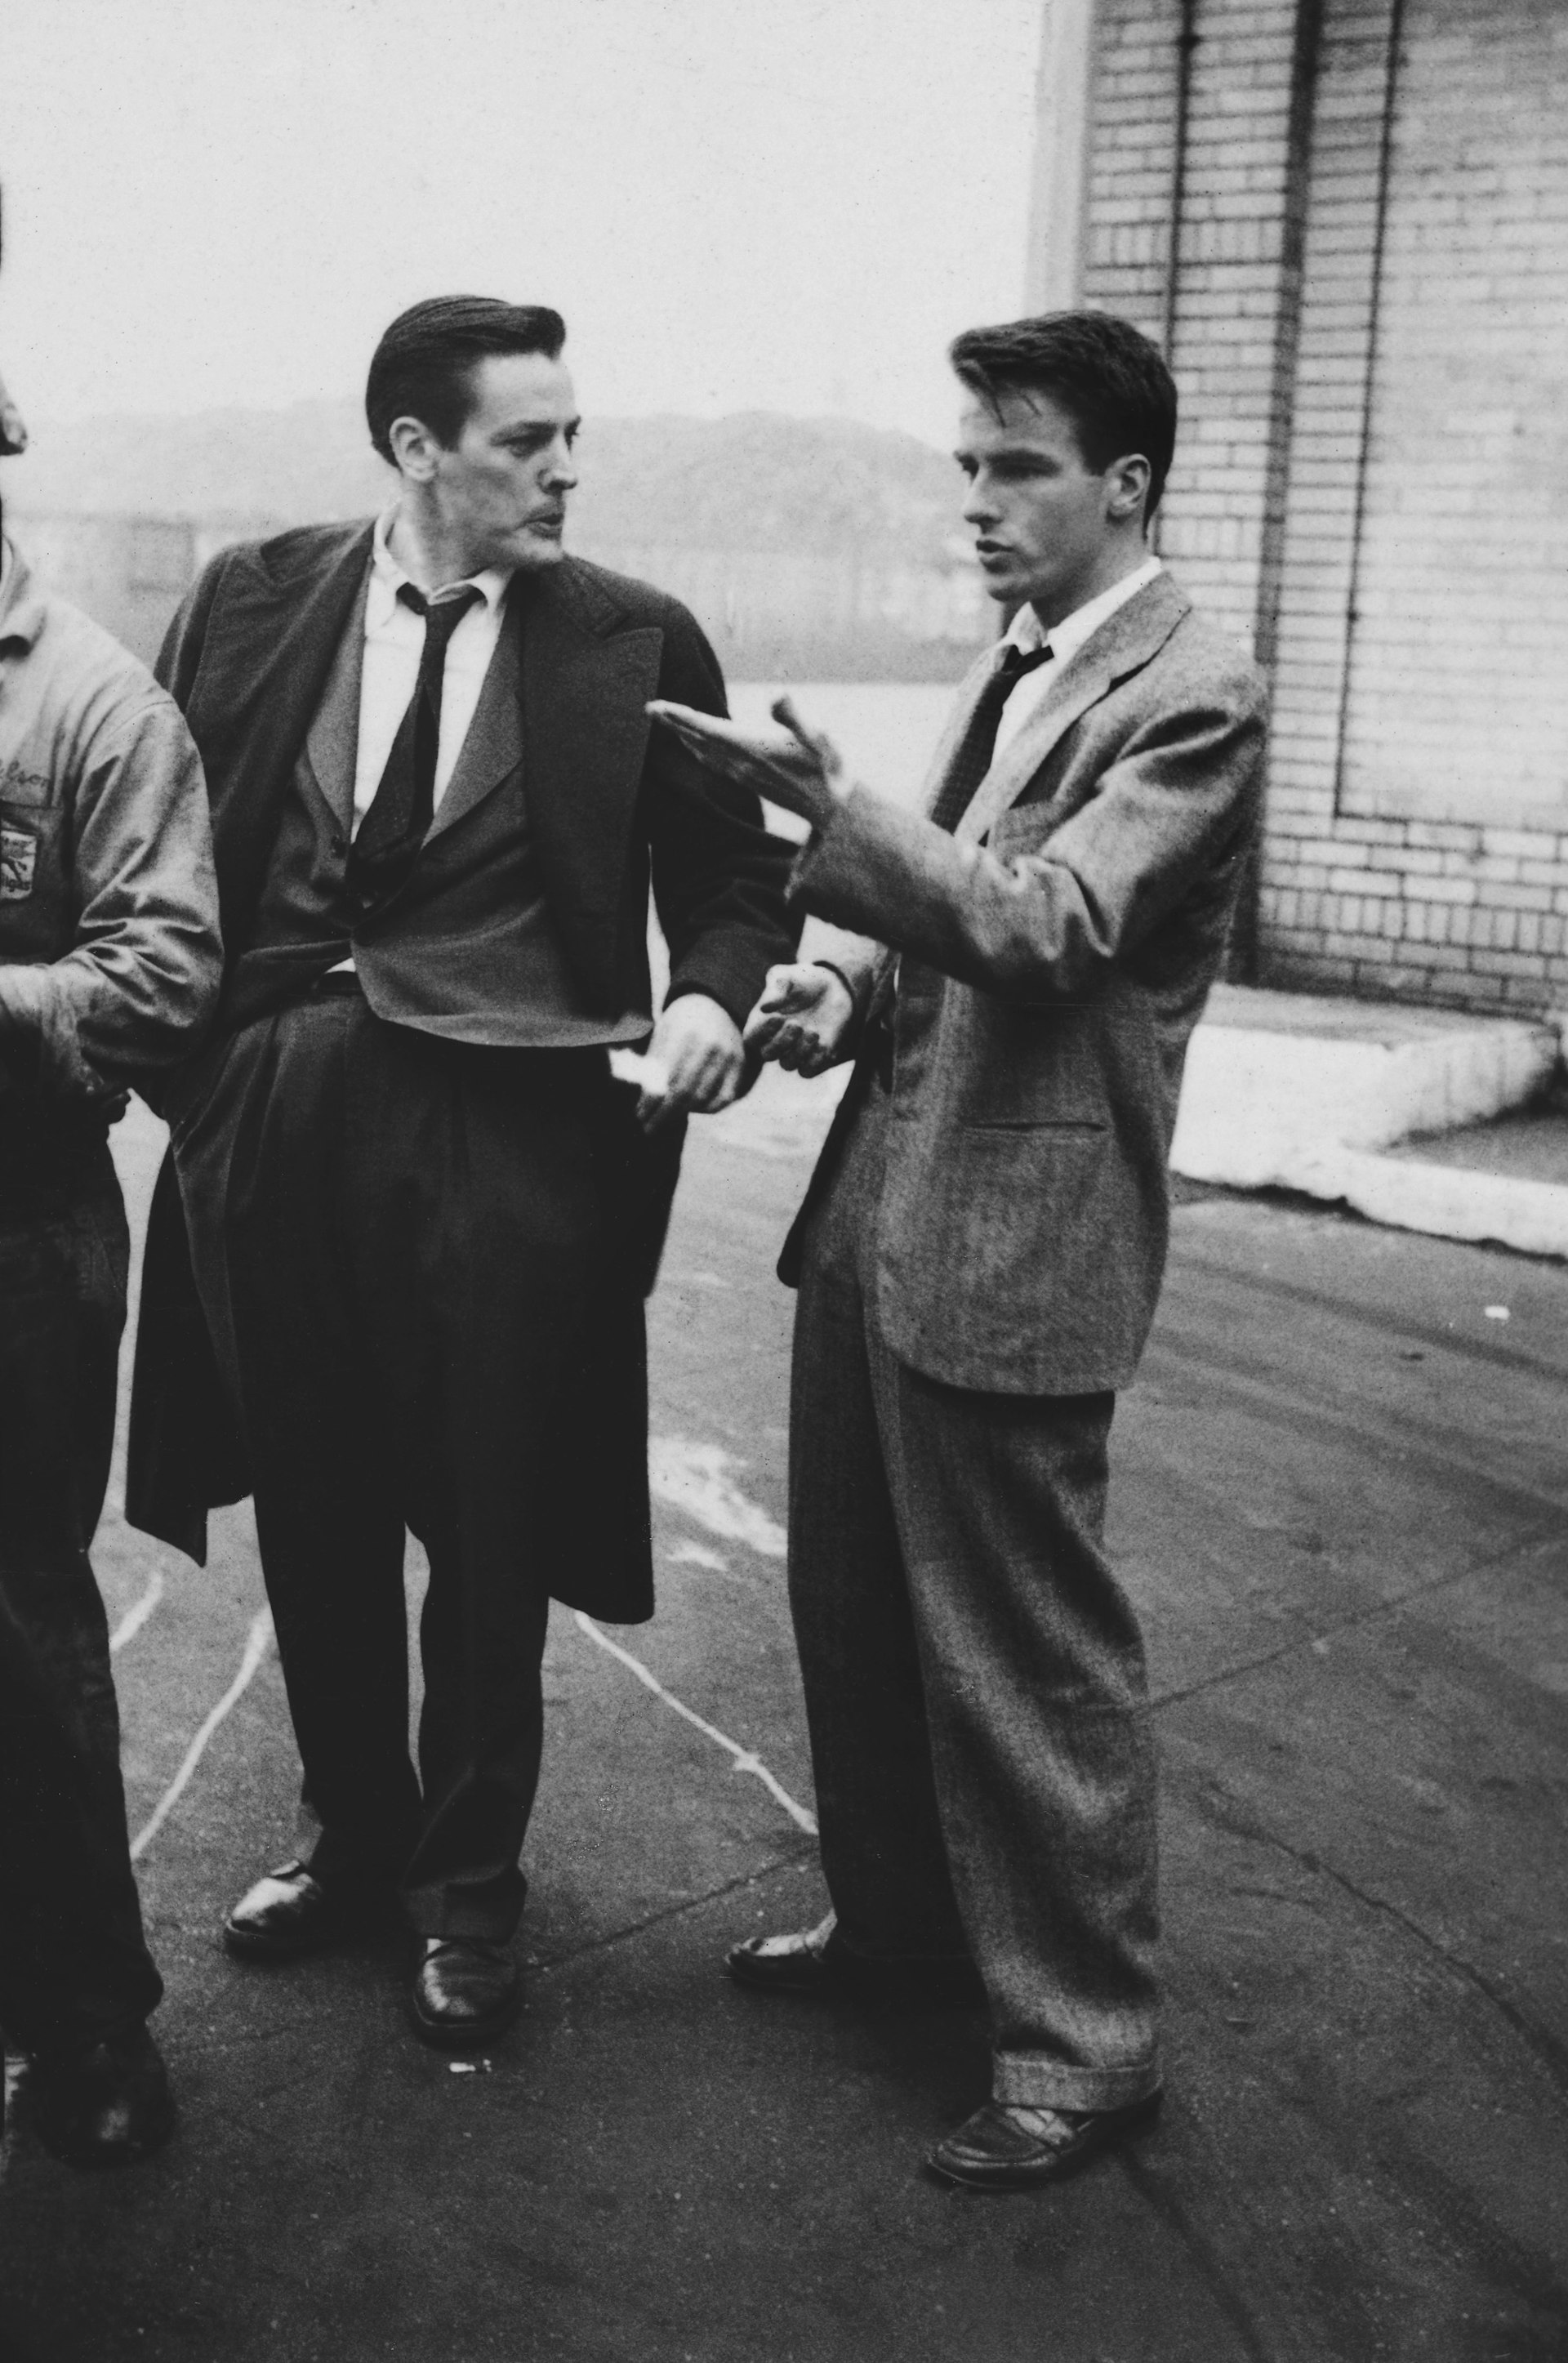 Stanley Kubrick, Montgomery Clift with fellow actor Kevin McCarthy from “Montgomery Clift: Glamour Boy in Baggy Pants”, 1949